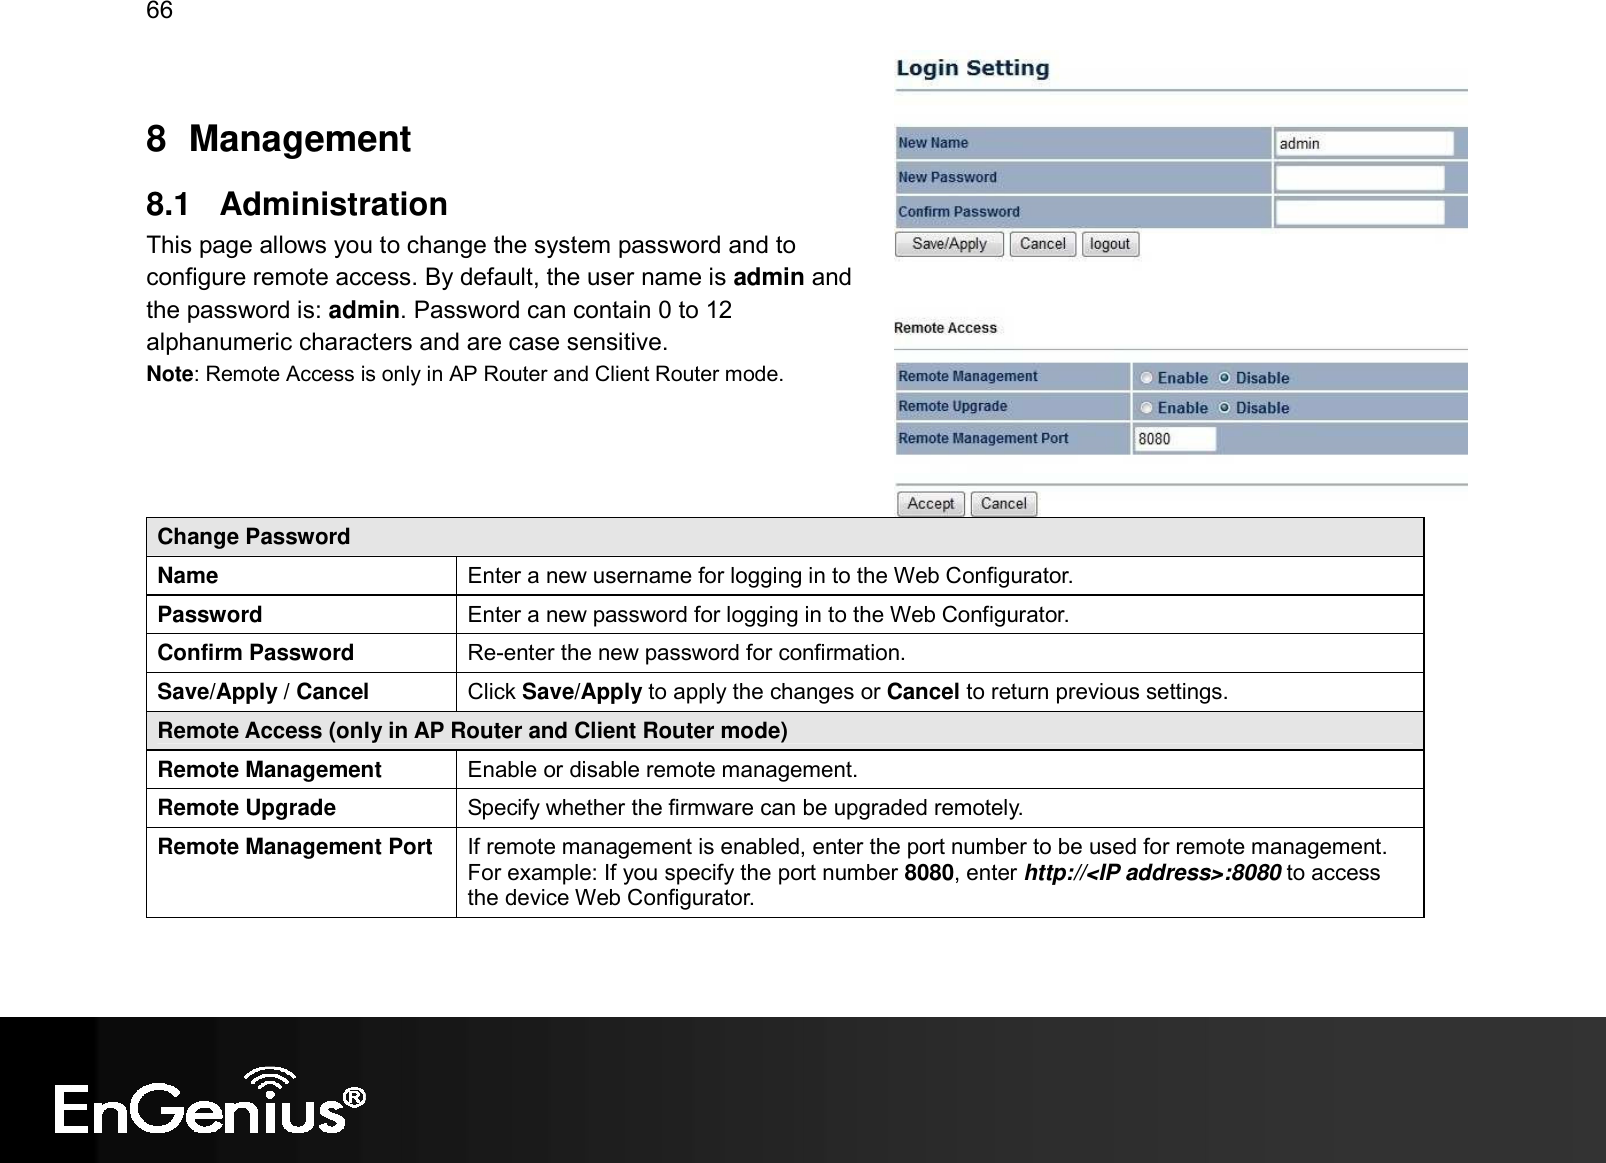 66  8  Management  8.1  Administration This page allows you to change the system password and to configure remote access. By default, the user name is admin and the password is: admin. Password can contain 0 to 12 alphanumeric characters and are case sensitive. Note: Remote Access is only in AP Router and Client Router mode.    Change Password Name  Enter a new username for logging in to the Web Configurator. Password  Enter a new password for logging in to the Web Configurator. Confirm Password  Re-enter the new password for confirmation. Save/Apply / Cancel  Click Save/Apply to apply the changes or Cancel to return previous settings. Remote Access (only in AP Router and Client Router mode) Remote Management  Enable or disable remote management. Remote Upgrade  Specify whether the firmware can be upgraded remotely. Remote Management Port  If remote management is enabled, enter the port number to be used for remote management. For example: If you specify the port number 8080, enter http://&lt;IP address&gt;:8080 to access the device Web Configurator.  